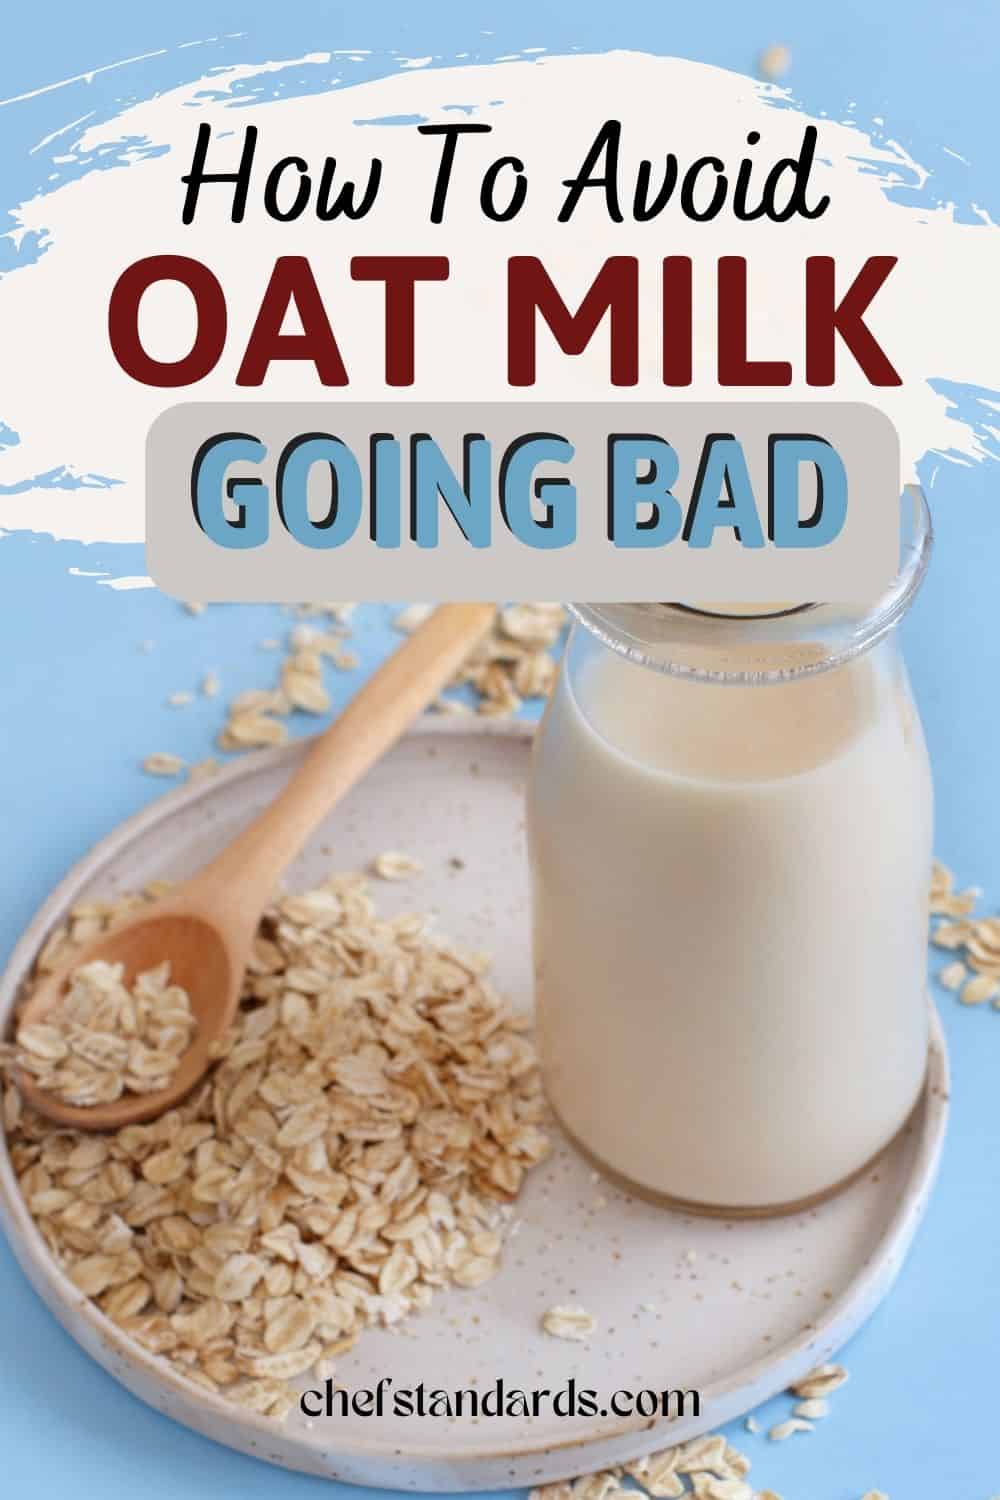 Does Oat Milk Go Bad + 4 Signs Of Spoilage
